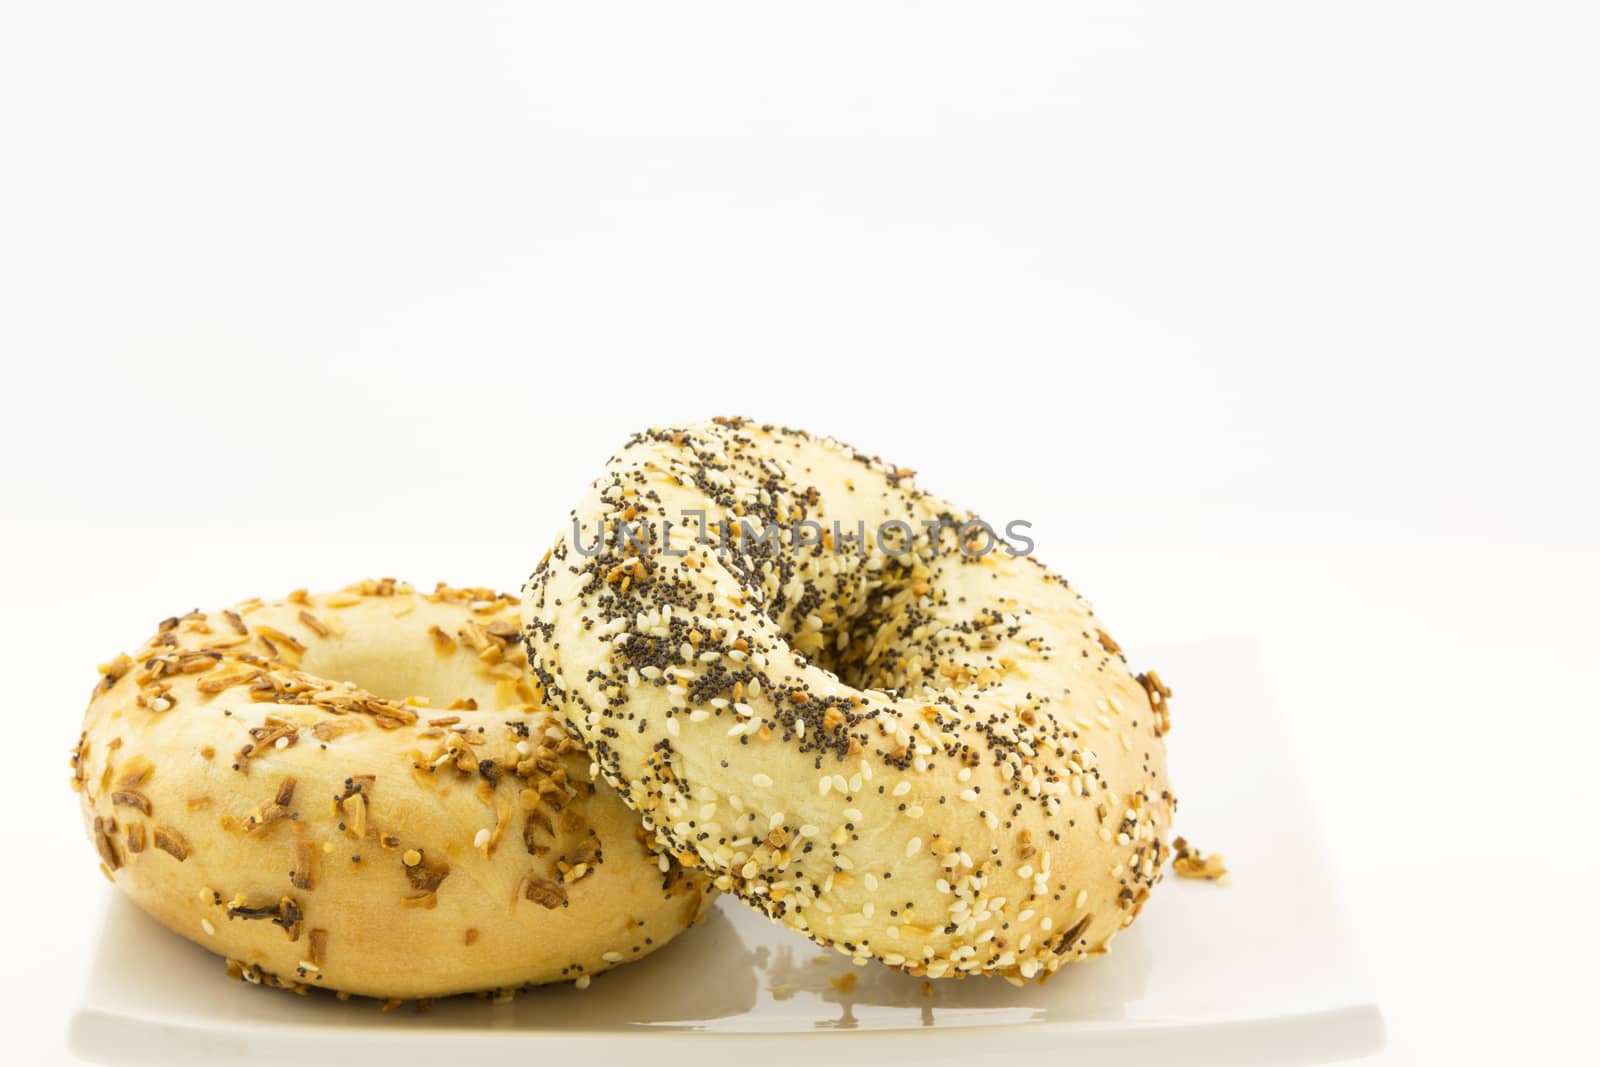 Everything bagel propped against onion bagel on white plate.  Specialty toppings are sesame and poppy seeds, roasted onion and garlic bits.  Horizontal image with copy space. 